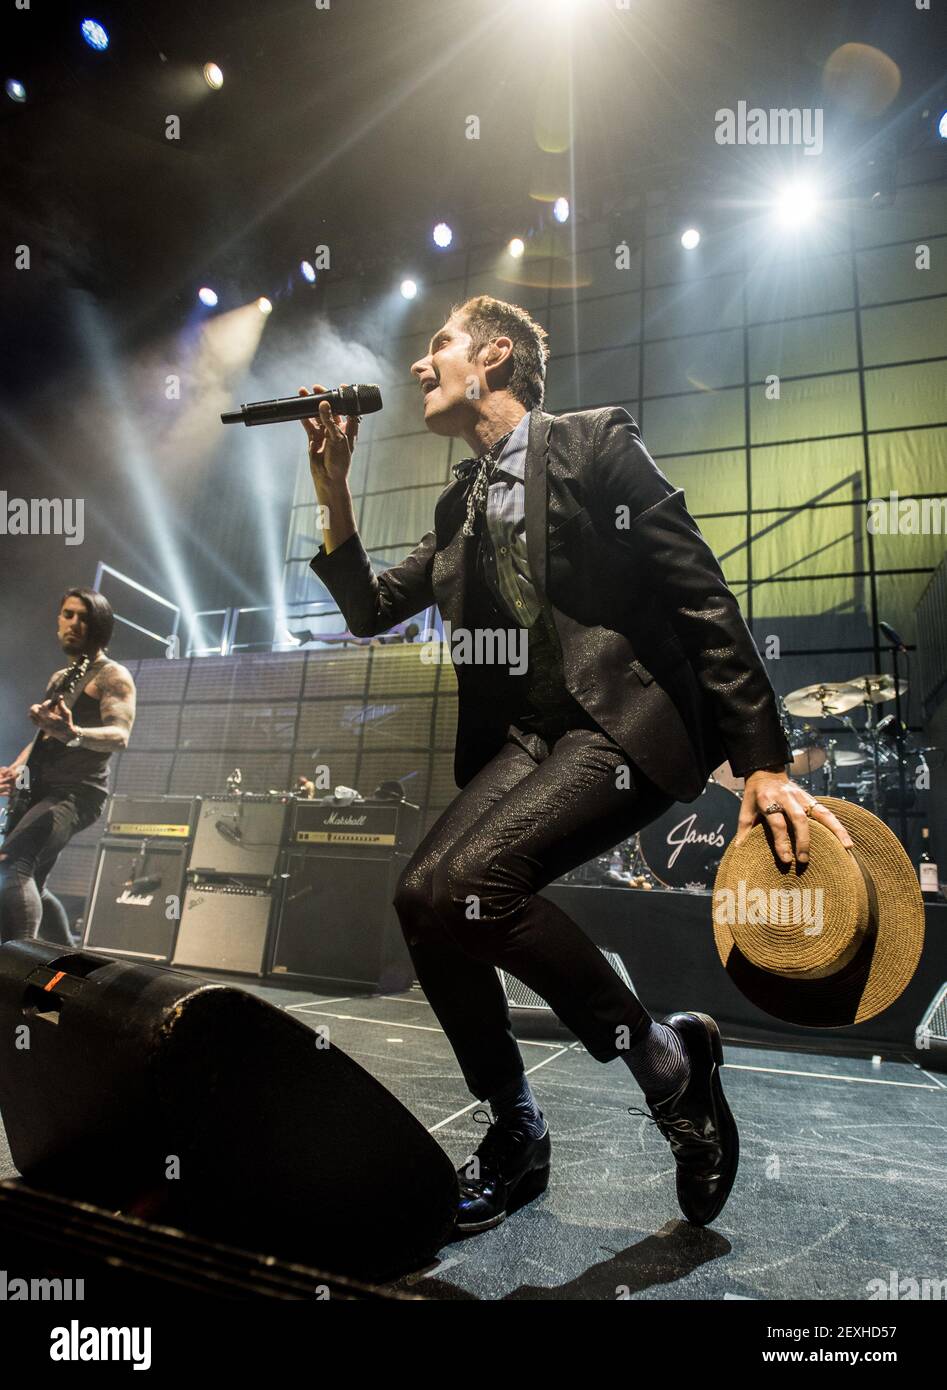 Musicians Perry Farrell and Dave Navarro of Janes Addiction performs at the Masonic Auditorium on September 21, 2016 in San Francisco, California. (Photo by Chris Tuite/ImageSPACE) *** Please Use Credit from Credit Field *** Stock Photo